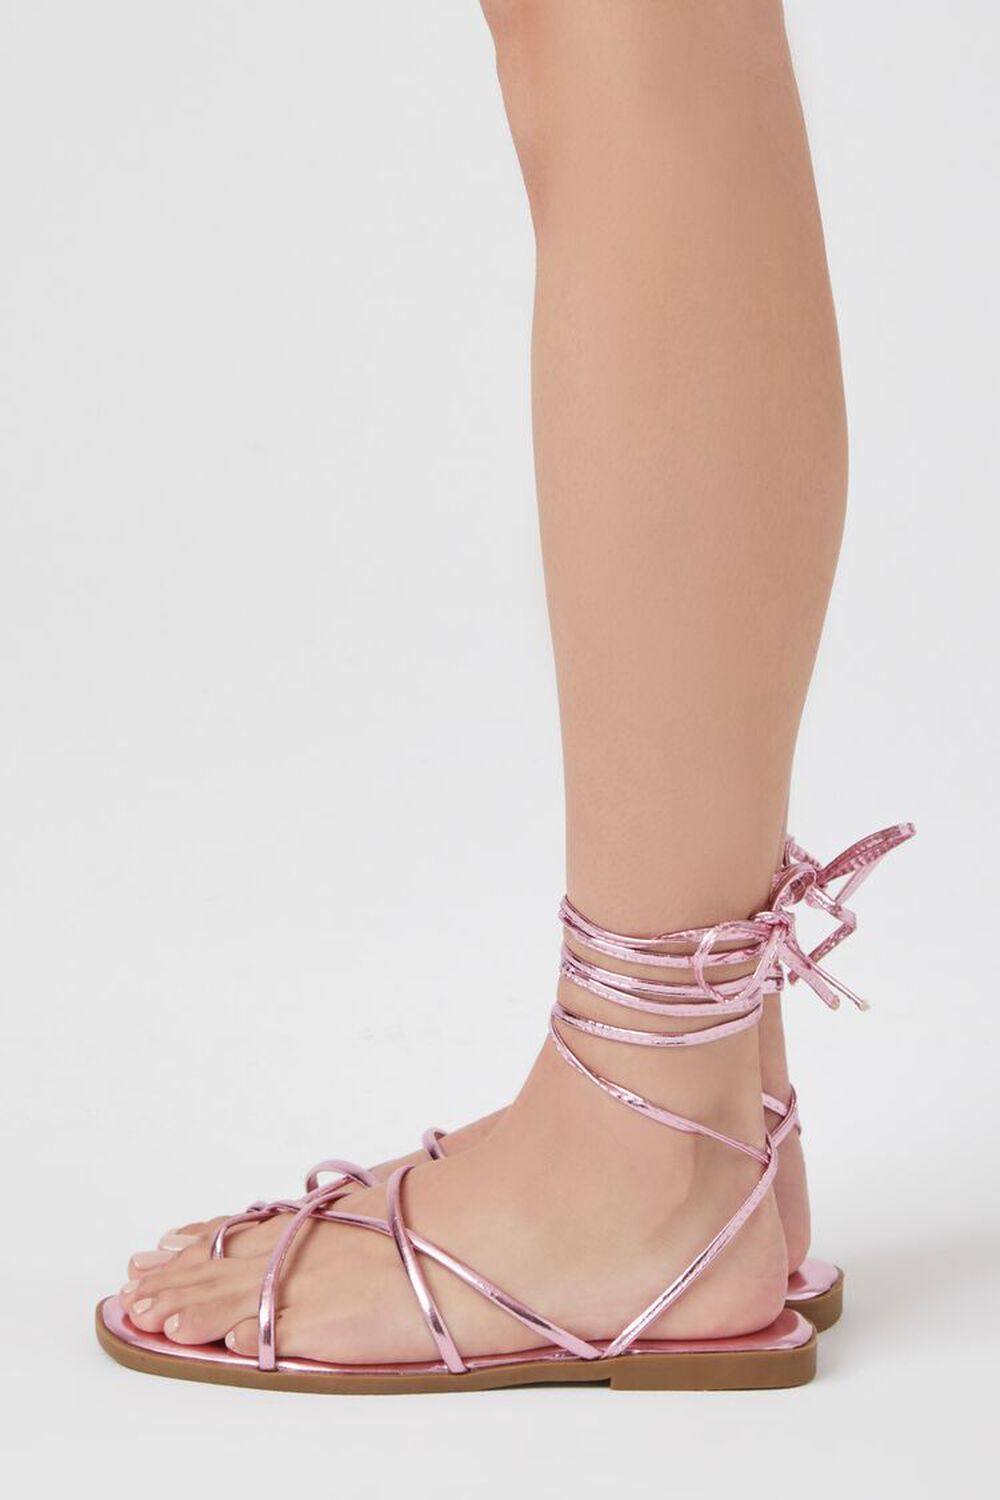 PINK Metallic Strappy Lace-Up Sandals, image 2